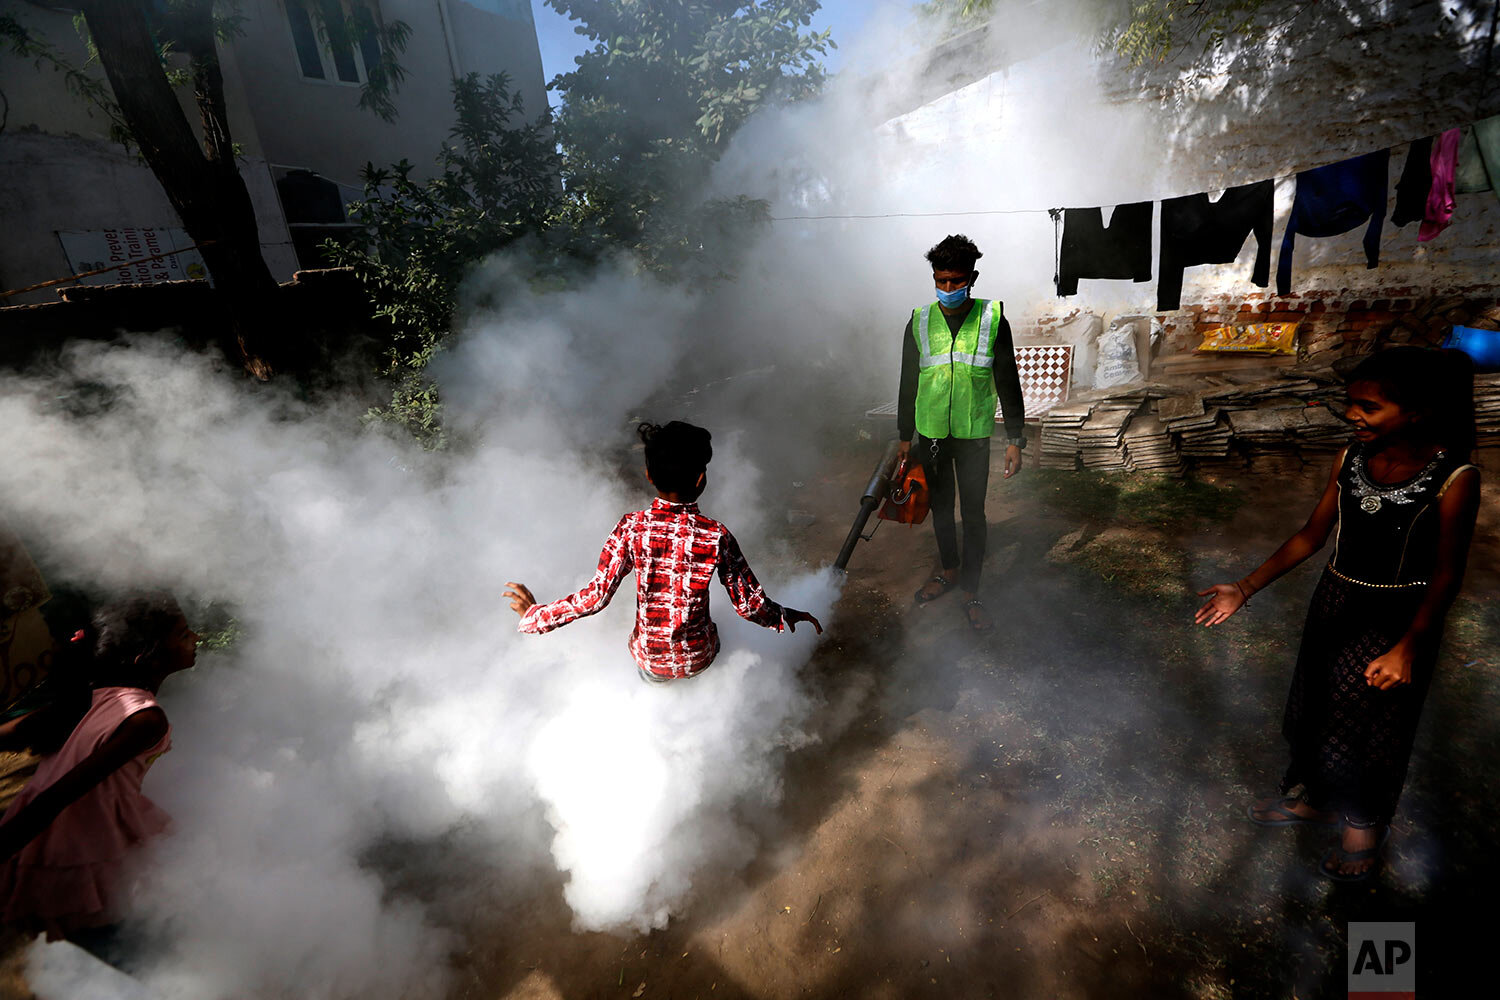  A boy plays in smoke from fumigation being carried out by a municipal worker at a residential area in Ahmedabad, India, Thursday, Dec. 3, 2020. (AP Photo/Ajit Solanki) 